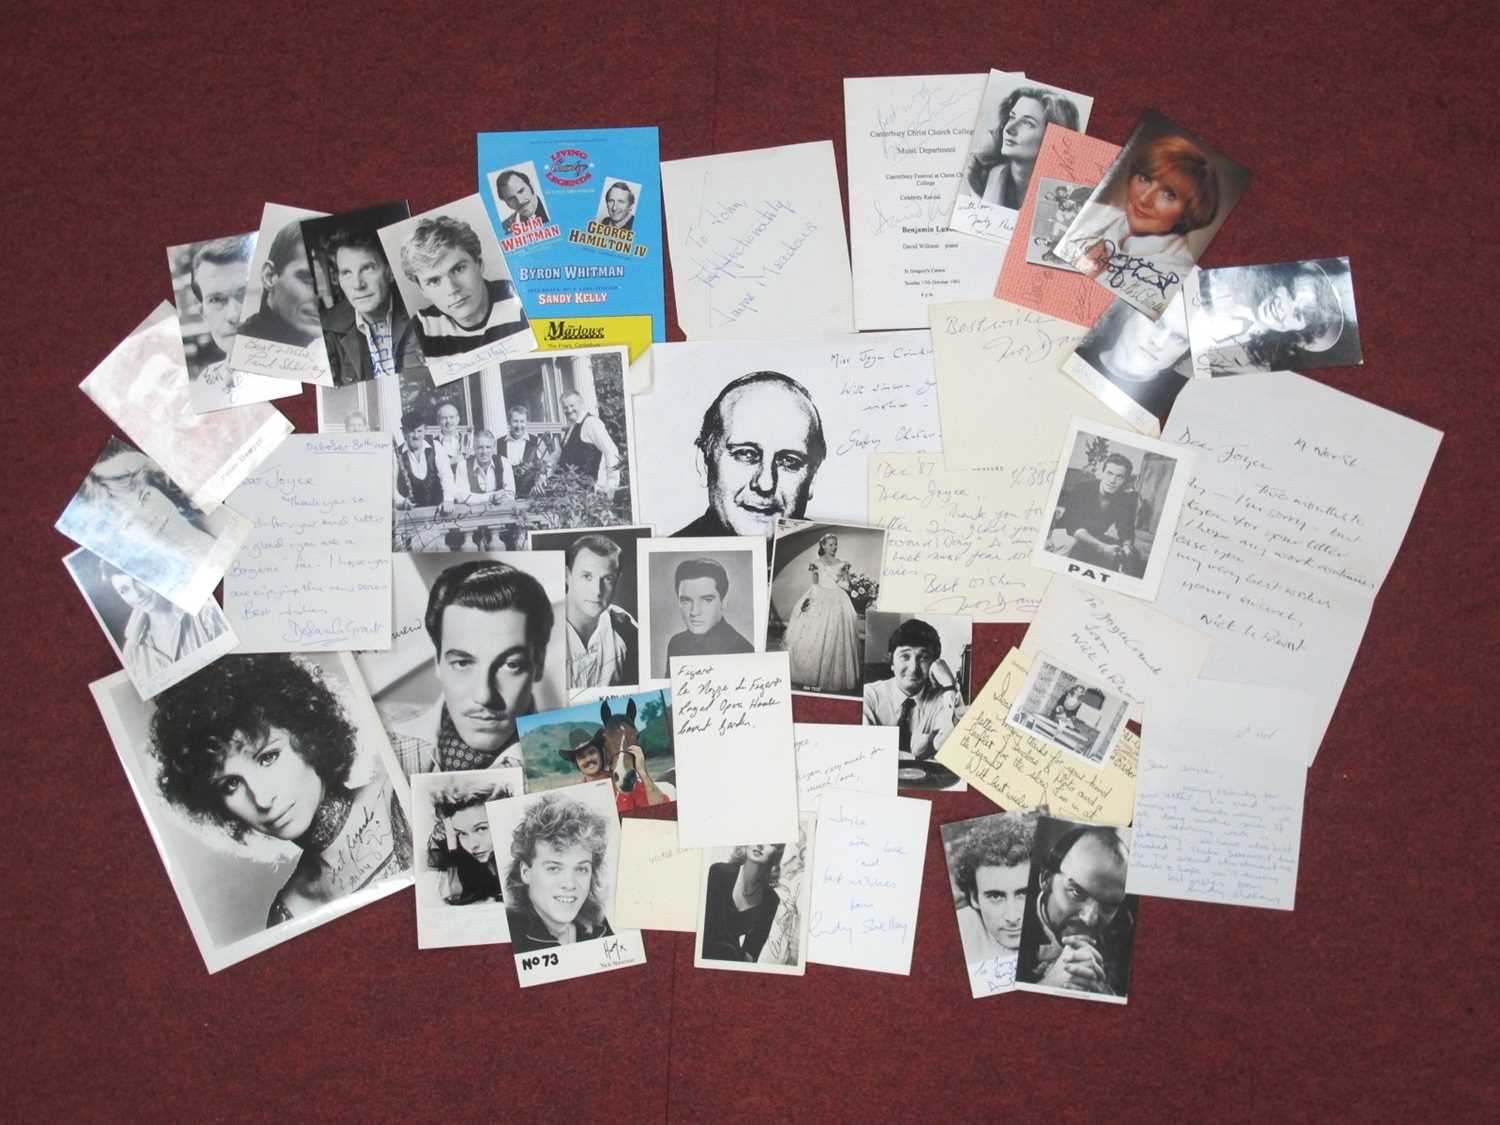 Autographs - Jody Richardson, Barbara Streisand, Karl Howman, and many others, ink signed (all